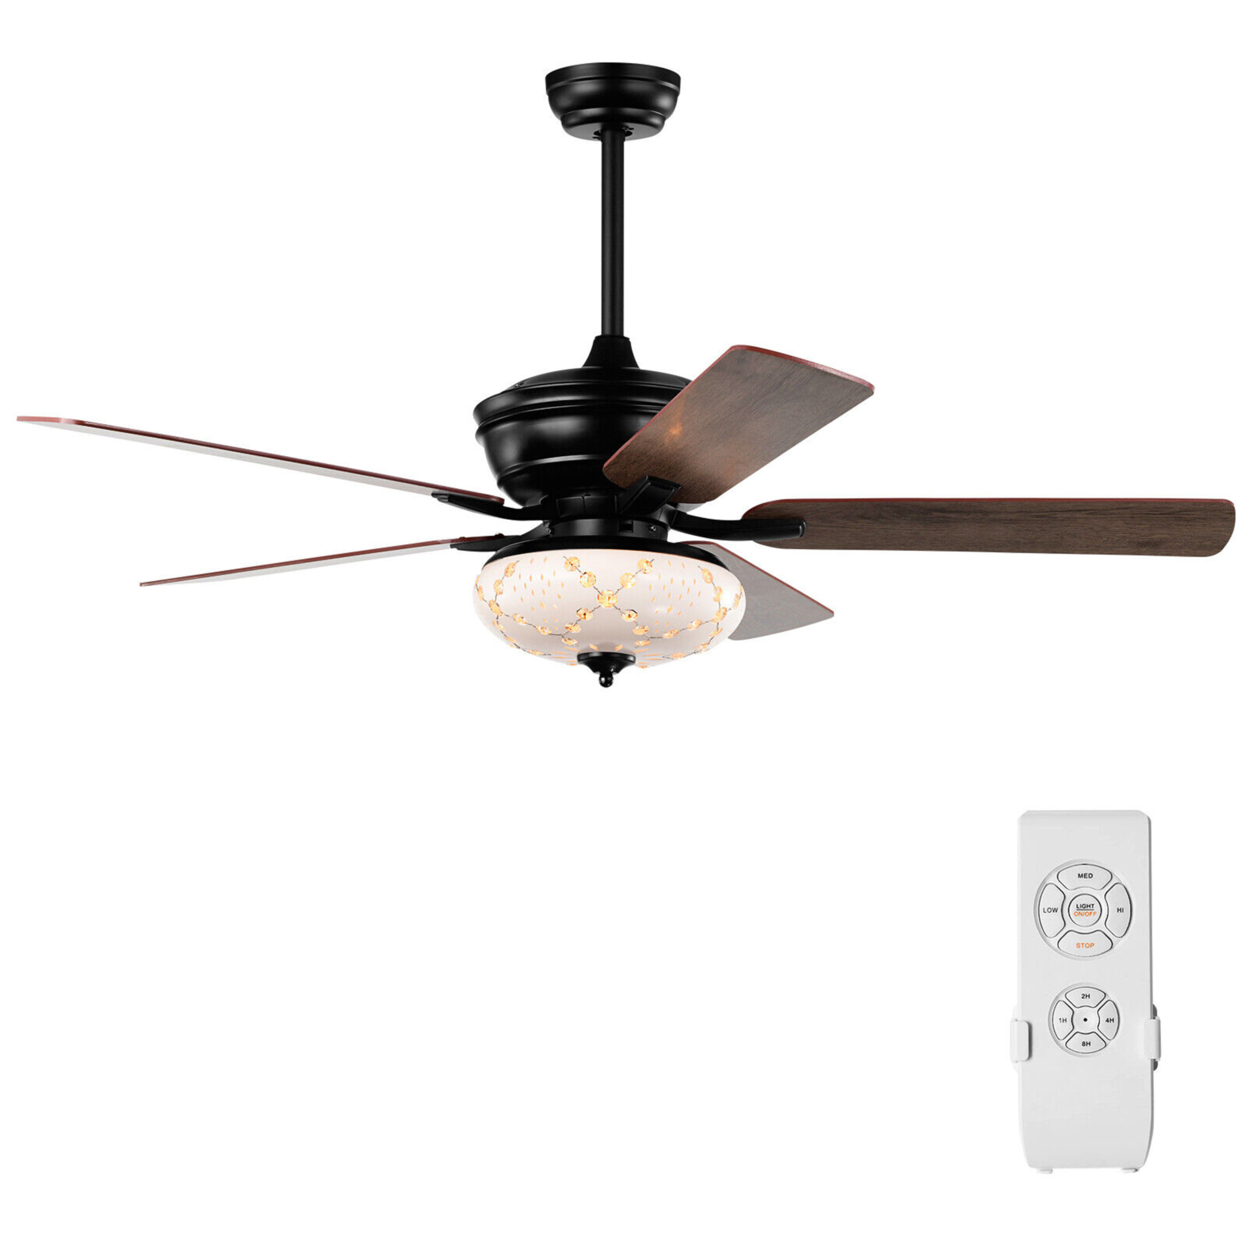 52'' Ceiling Fan With 3 Wind Speeds 5 Reversible Blades & Remote Control - Matte Black